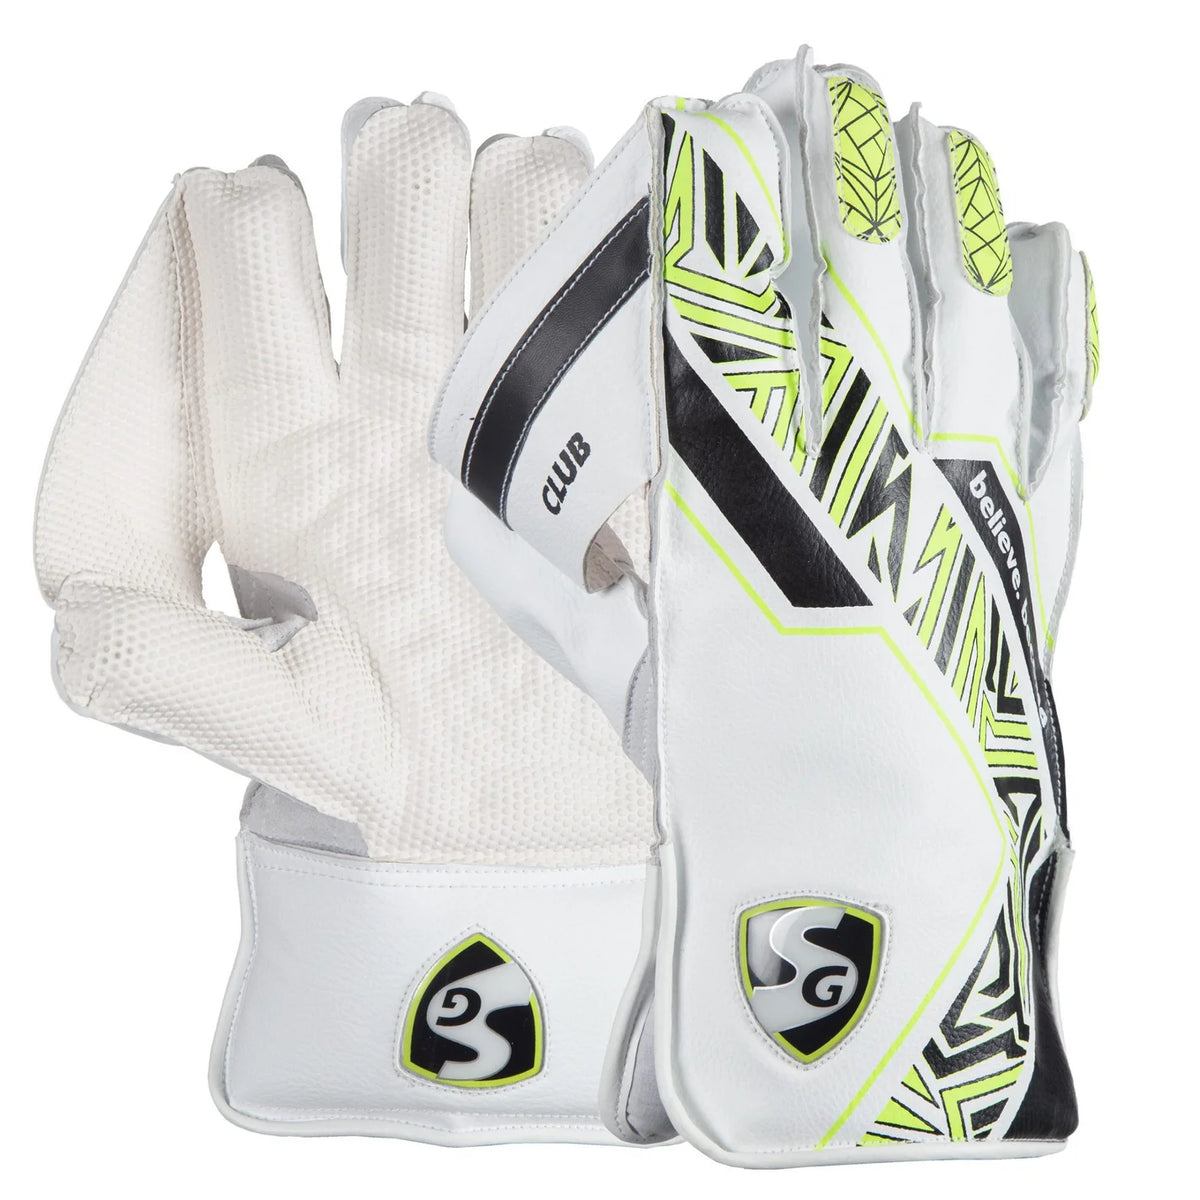 Pre-Order SG Club Wicket Keeping Gloves (Multi-Color) W.K. Gloves